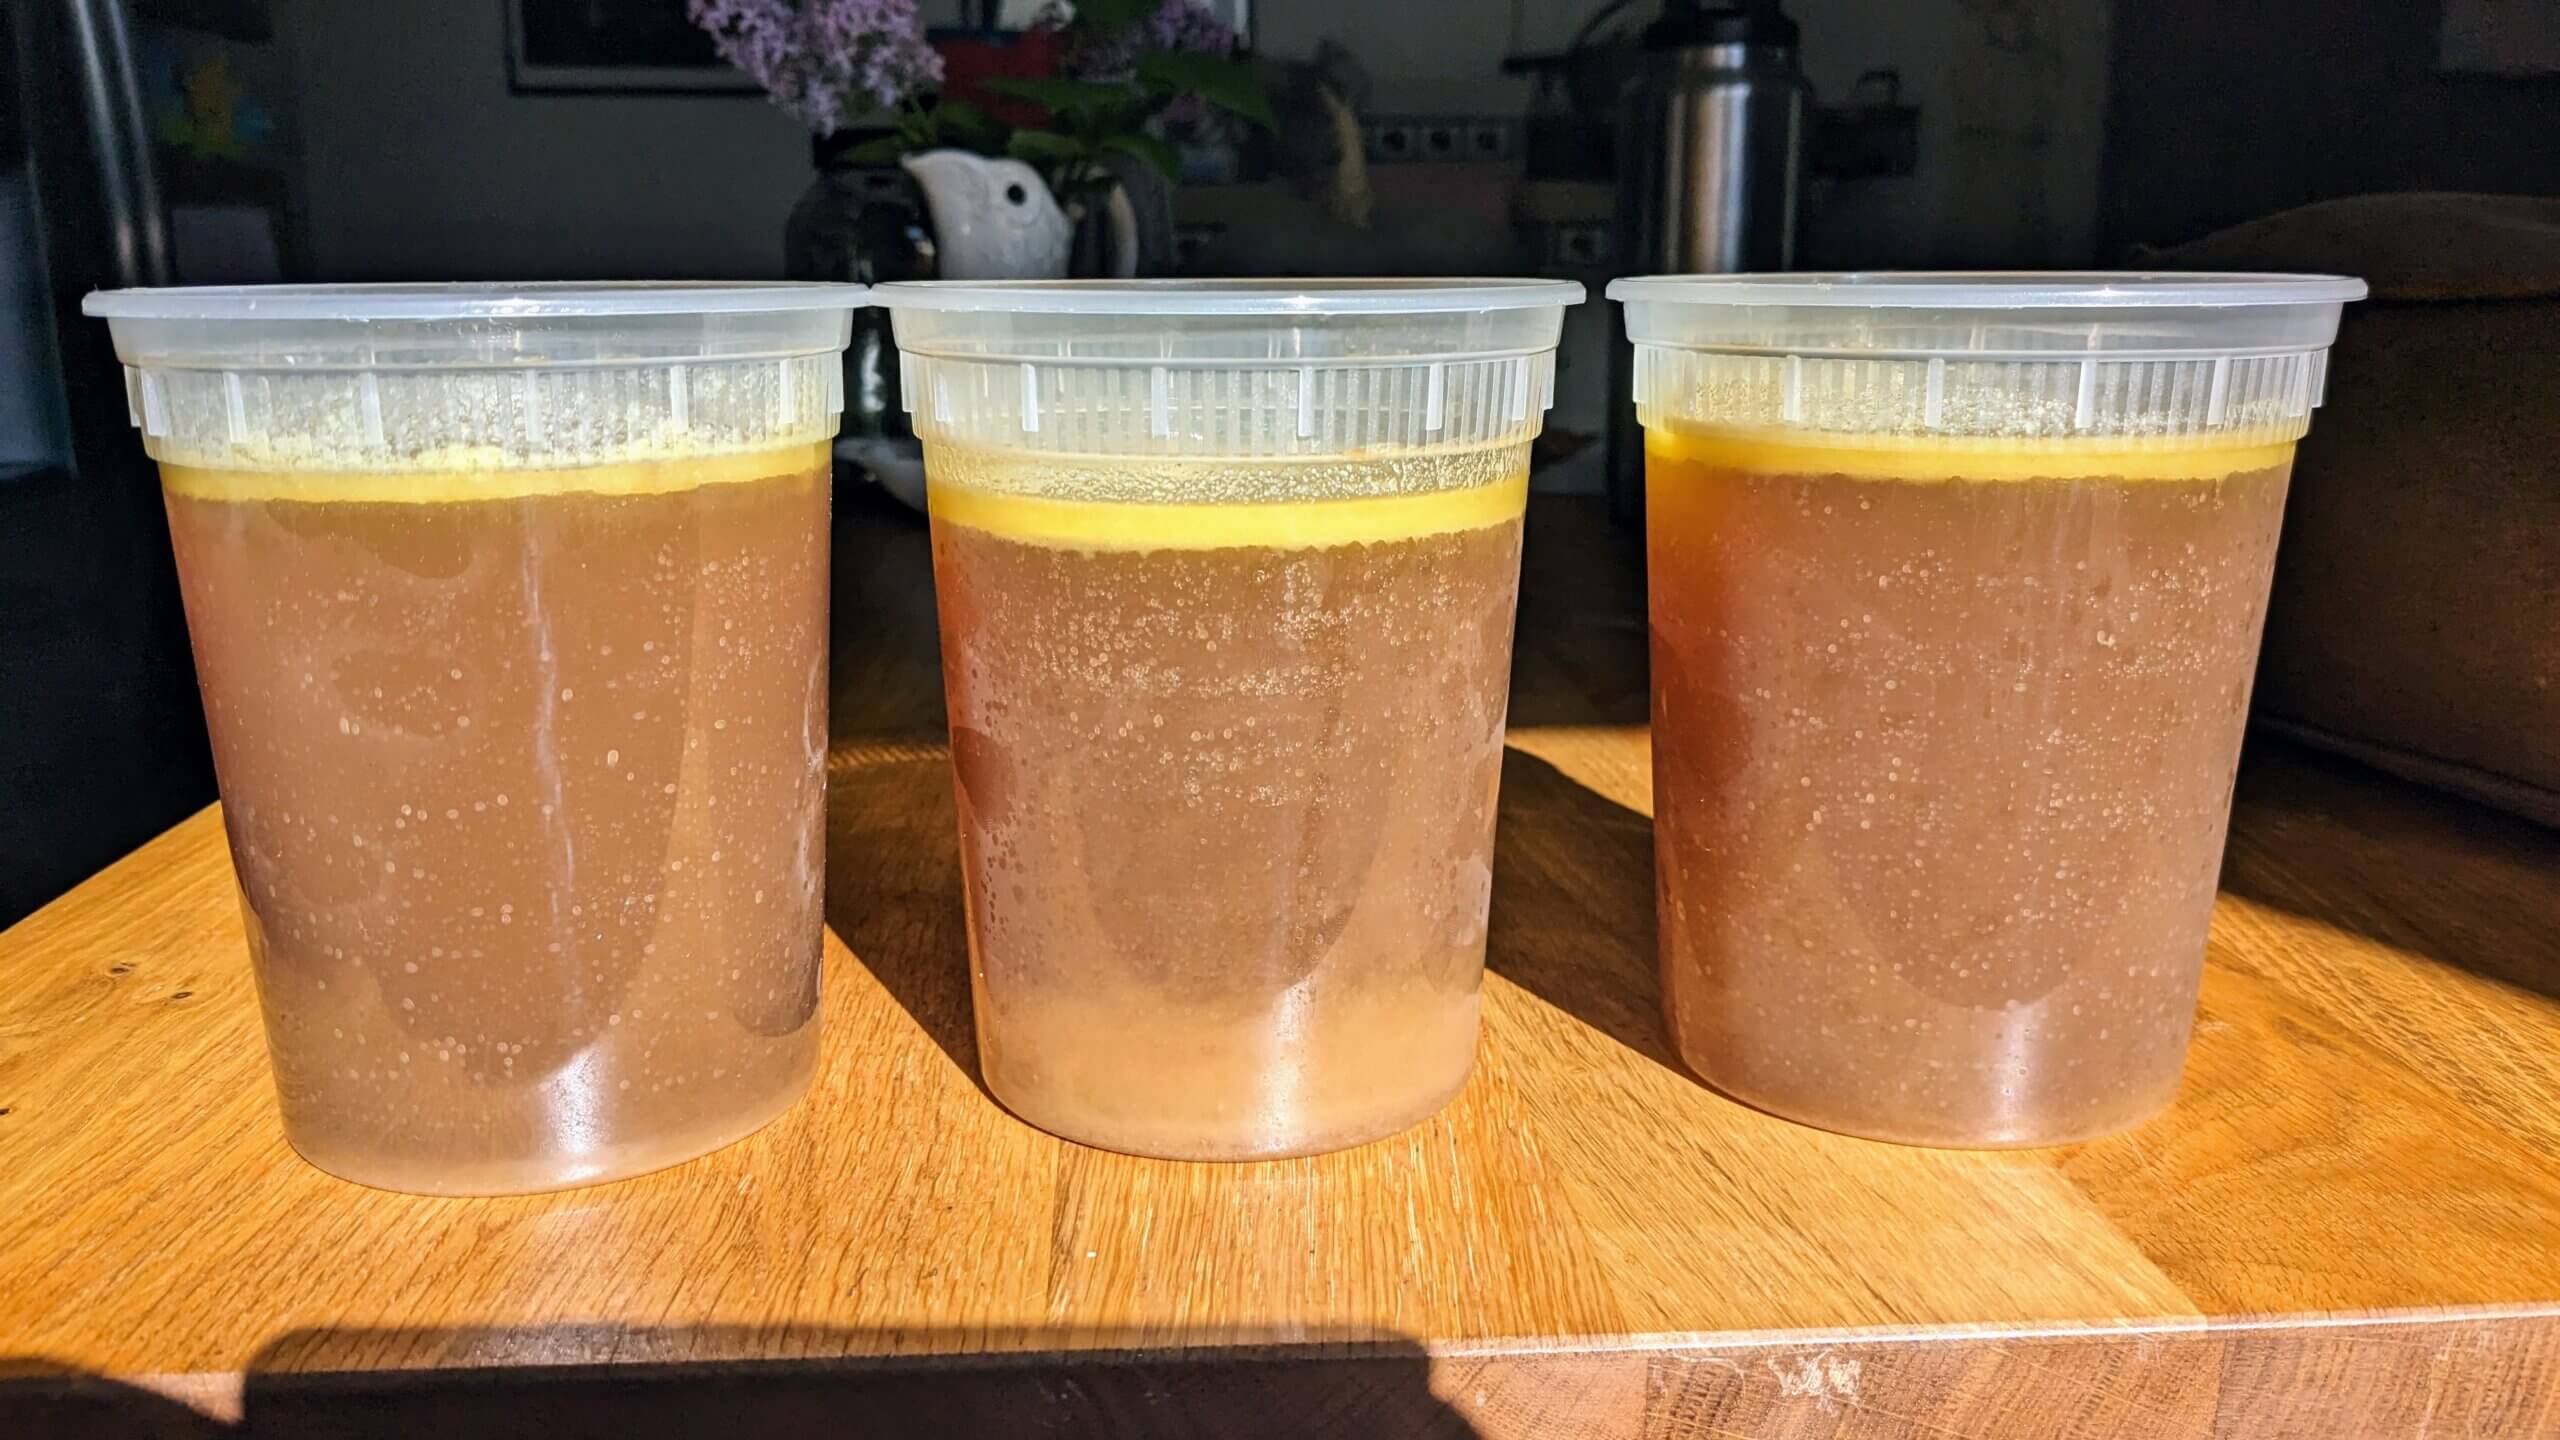 3 containers of homemade chicken stock